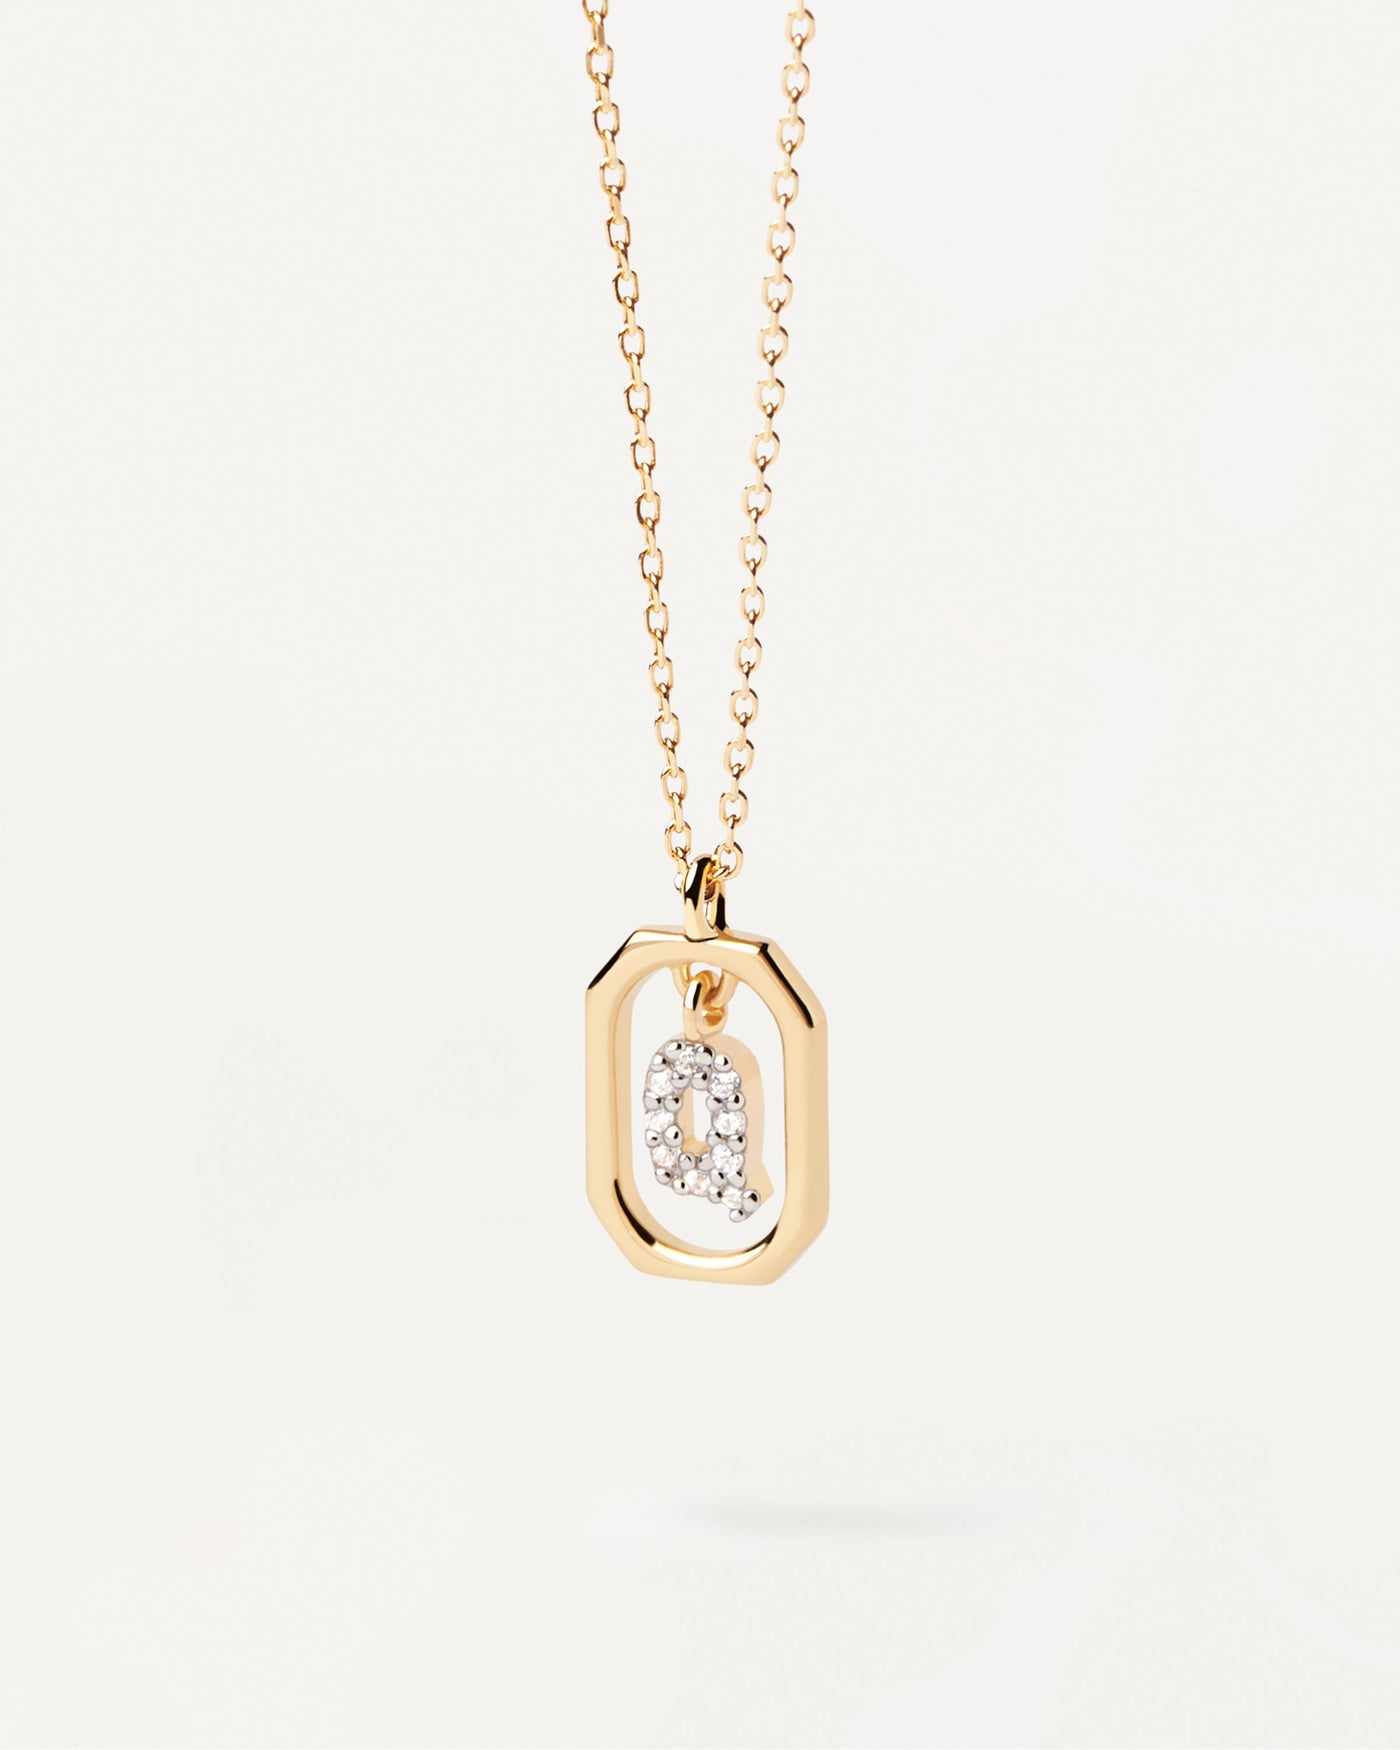 2023 Selection | Mini Letter Q Necklace. Small initial Q necklace in zirconia inside gold-plated silver octagonal pendant. Get the latest arrival from PDPAOLA. Place your order safely and get this Best Seller. Free Shipping.